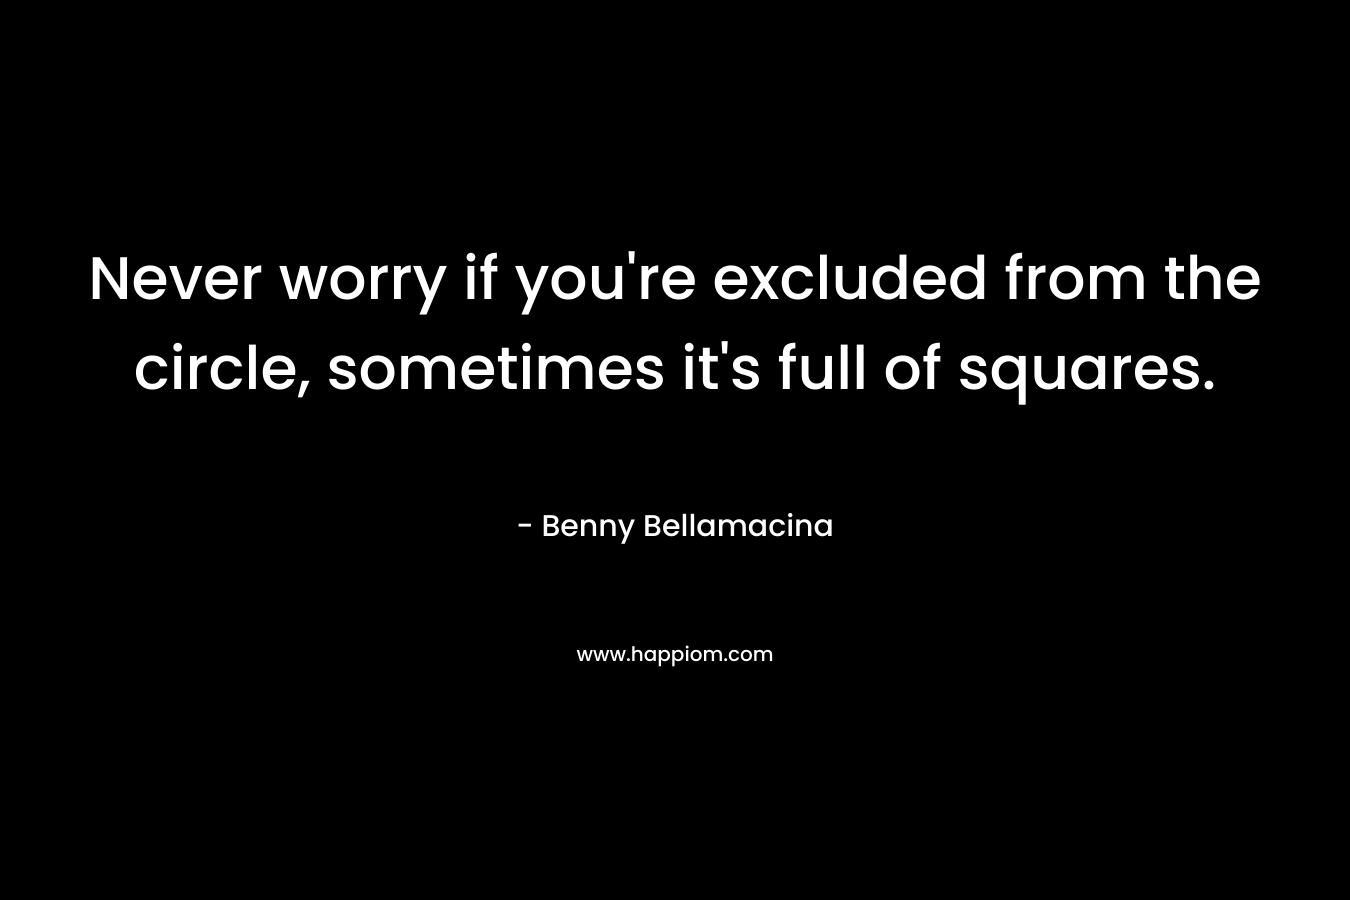 Never worry if you’re excluded from the circle, sometimes it’s full of squares. – Benny Bellamacina